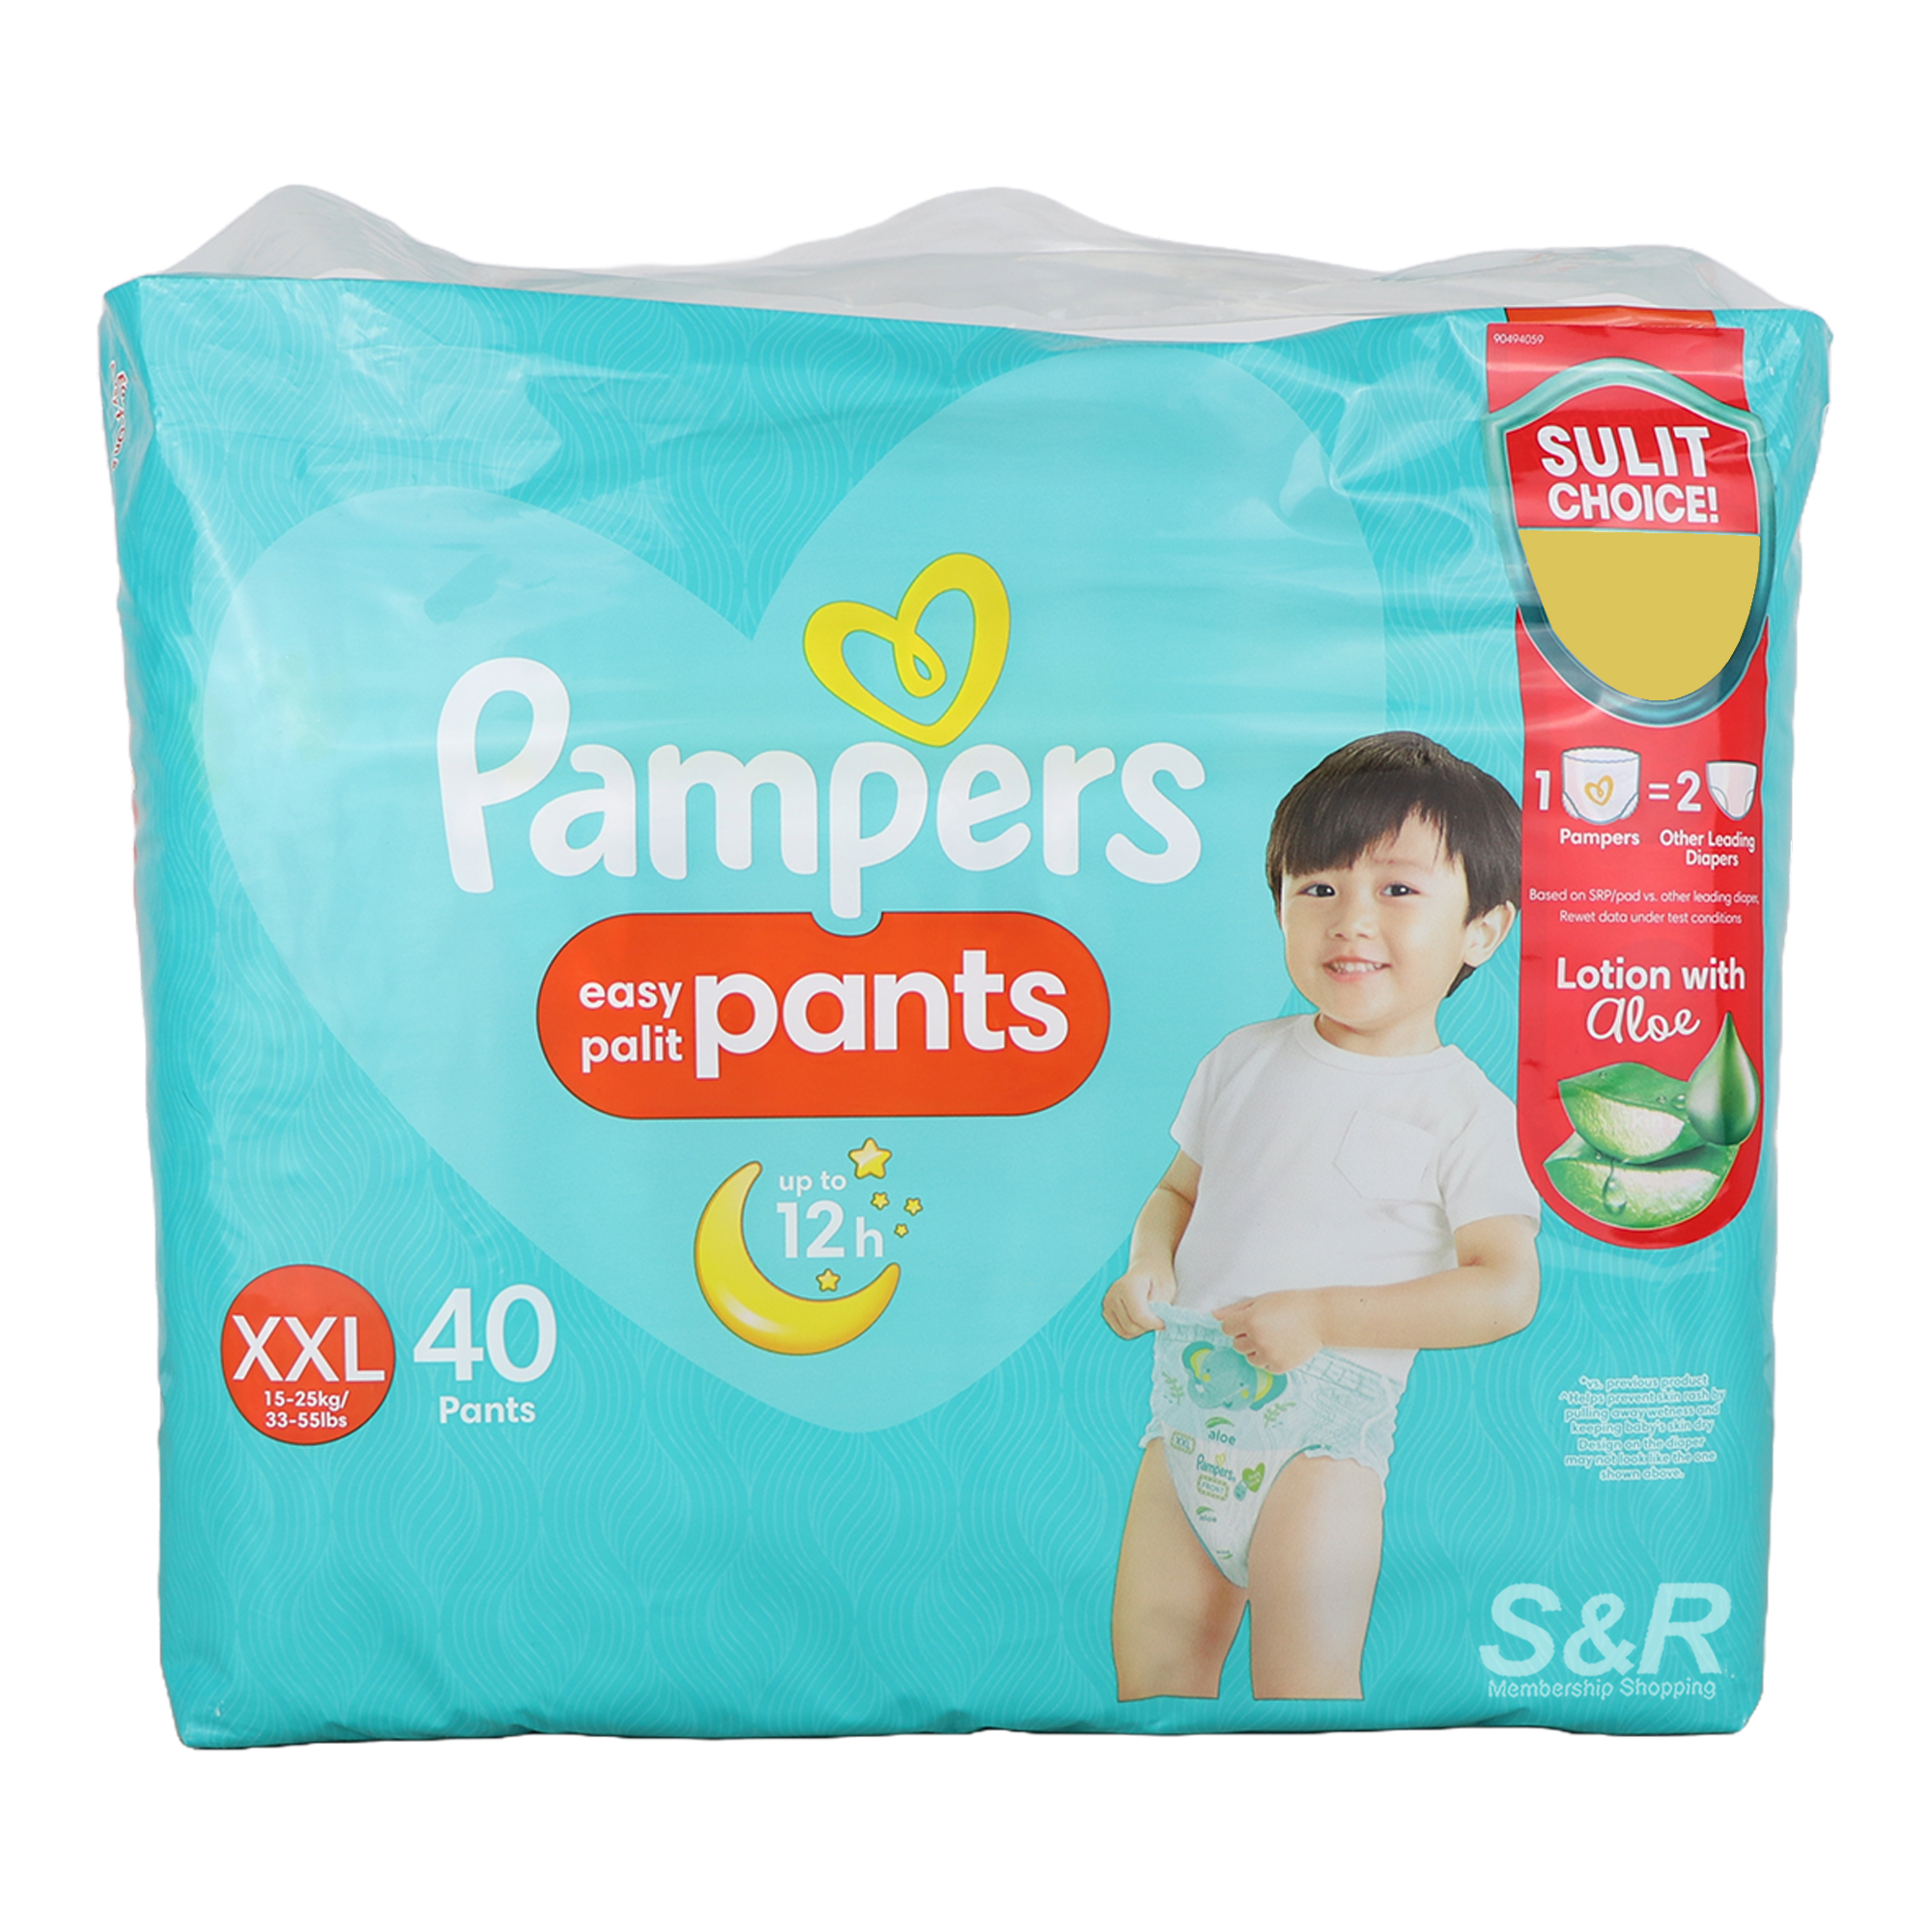 Buy BUMTUM BABY DIAPER PANTS, XXL SIZE 104 COUNT, DOUBLE LAYER LEAKAGE  PROTECTION (PACK OF 2) Online & Get Upto 60% OFF at PharmEasy